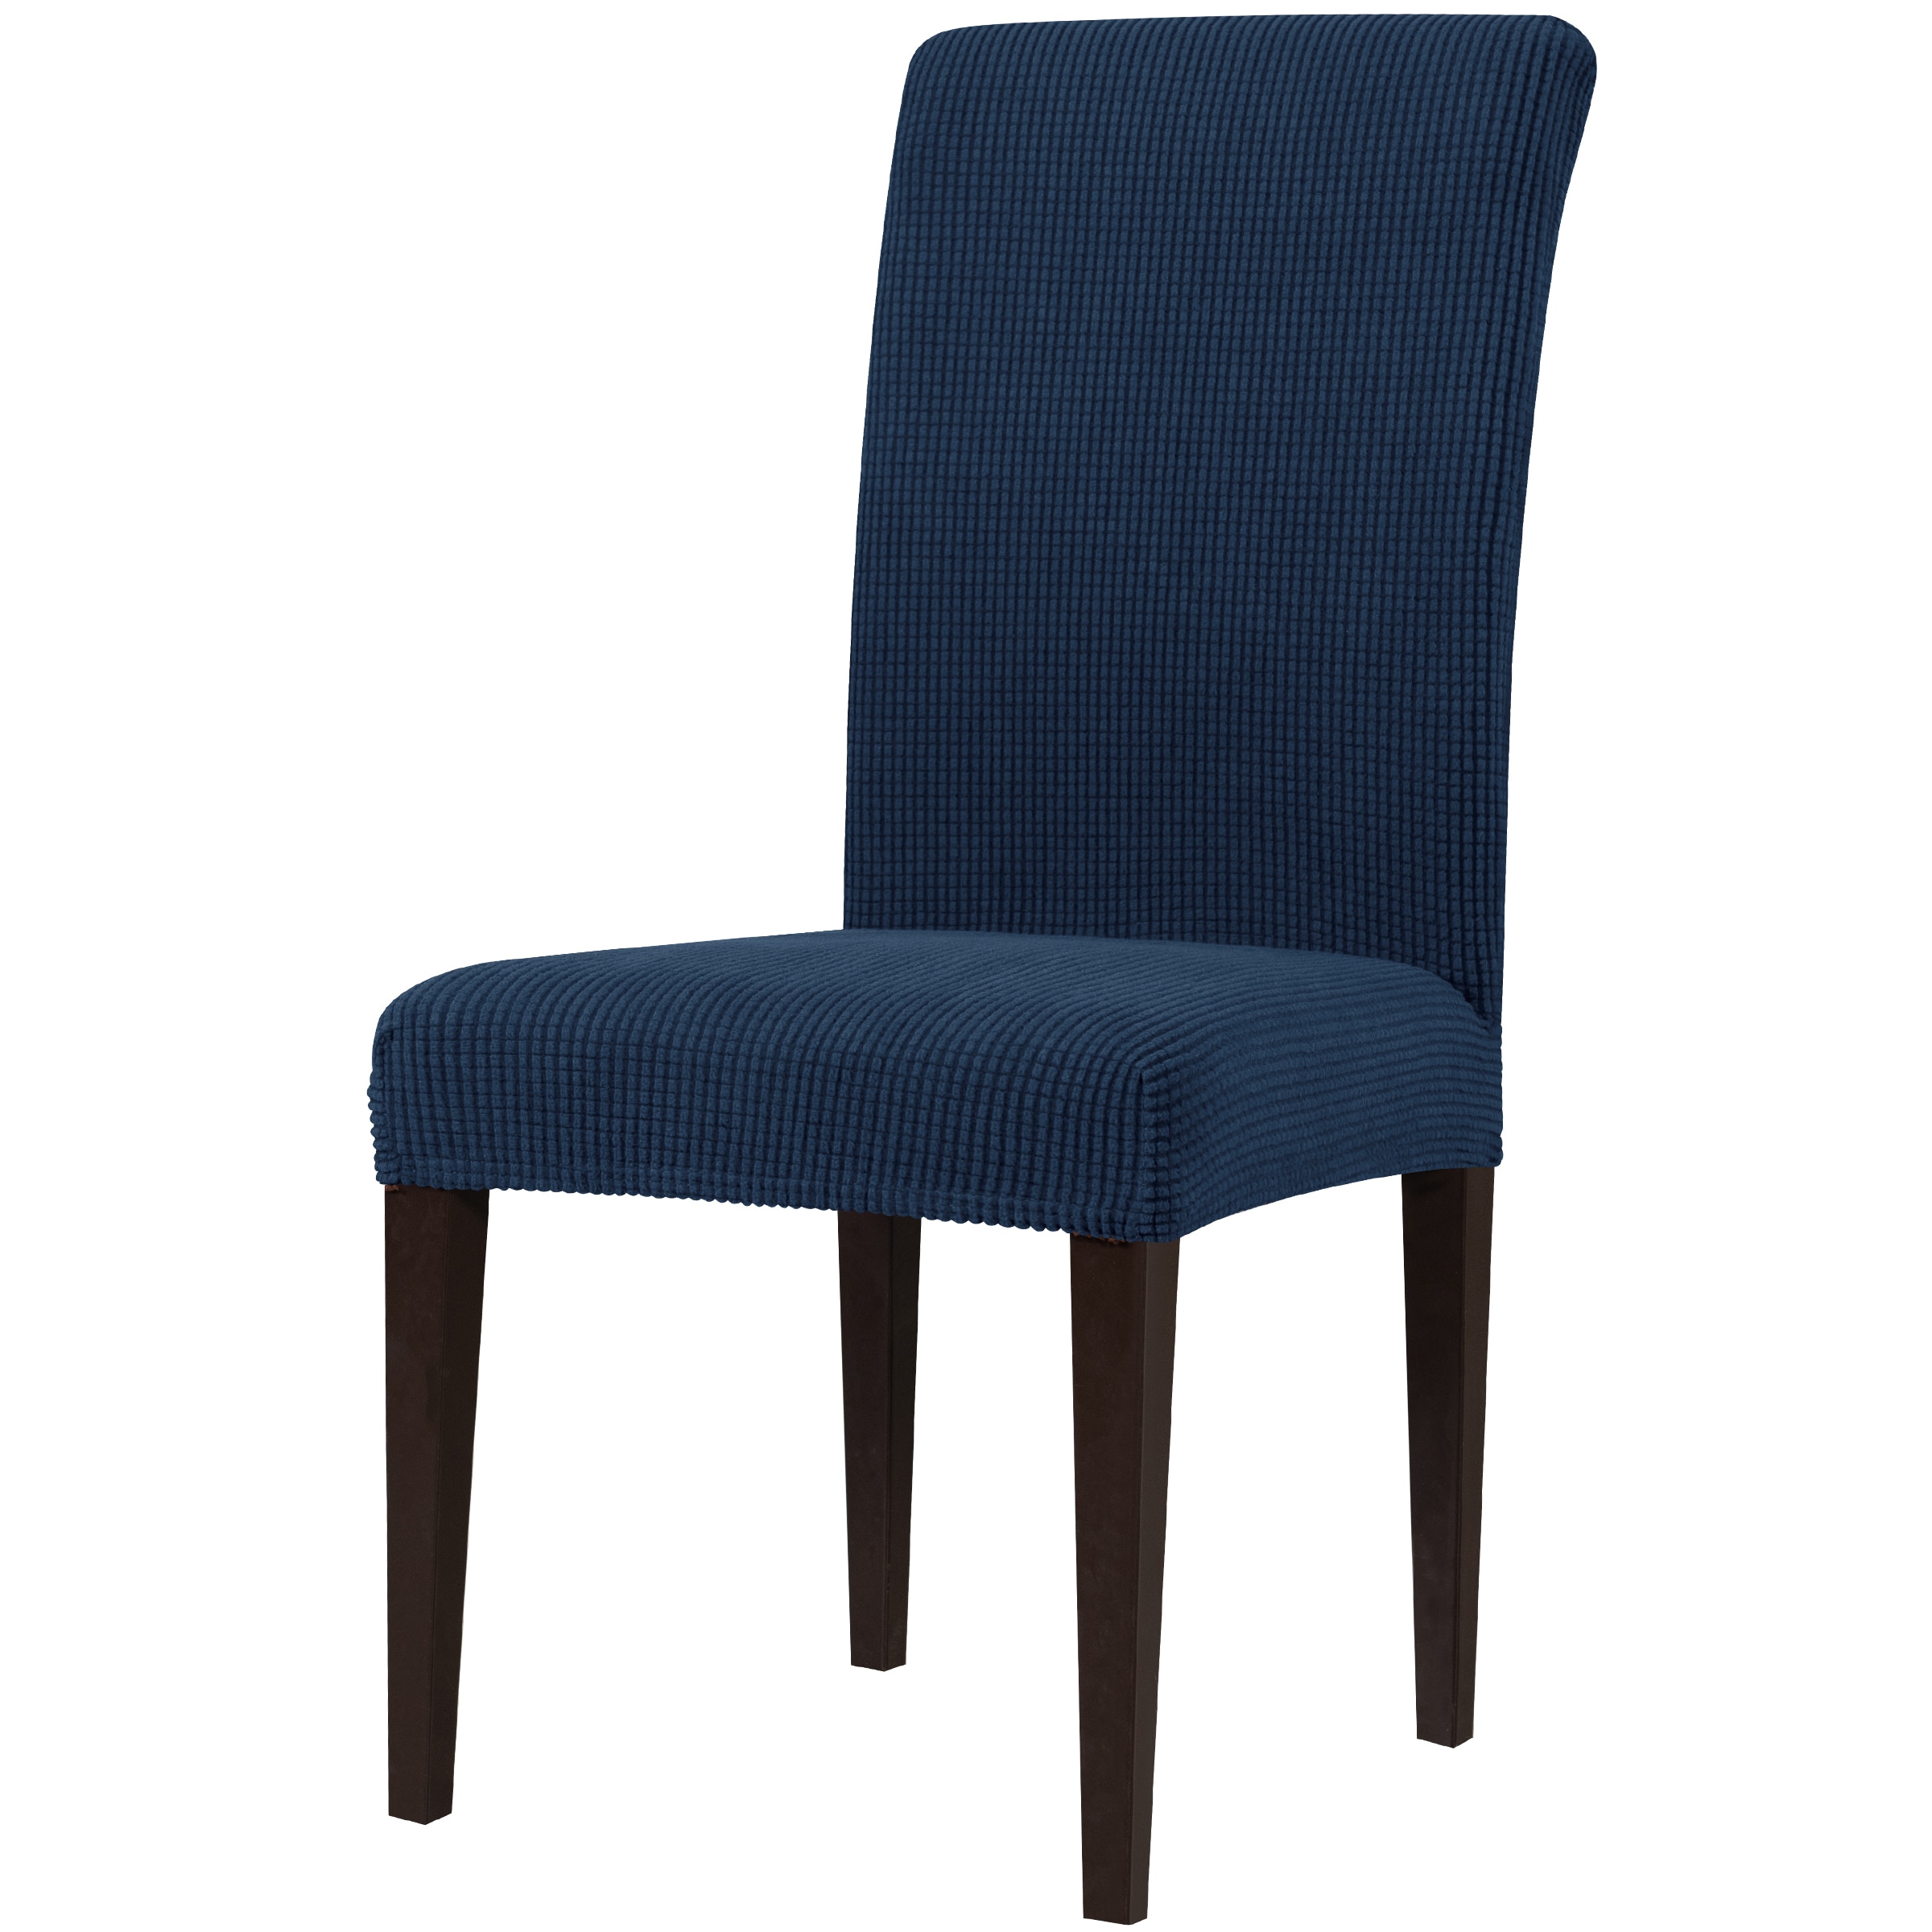 Box Cushion Dining Chair Slipcover, Navy Blue Parsons Chair Slipcovers